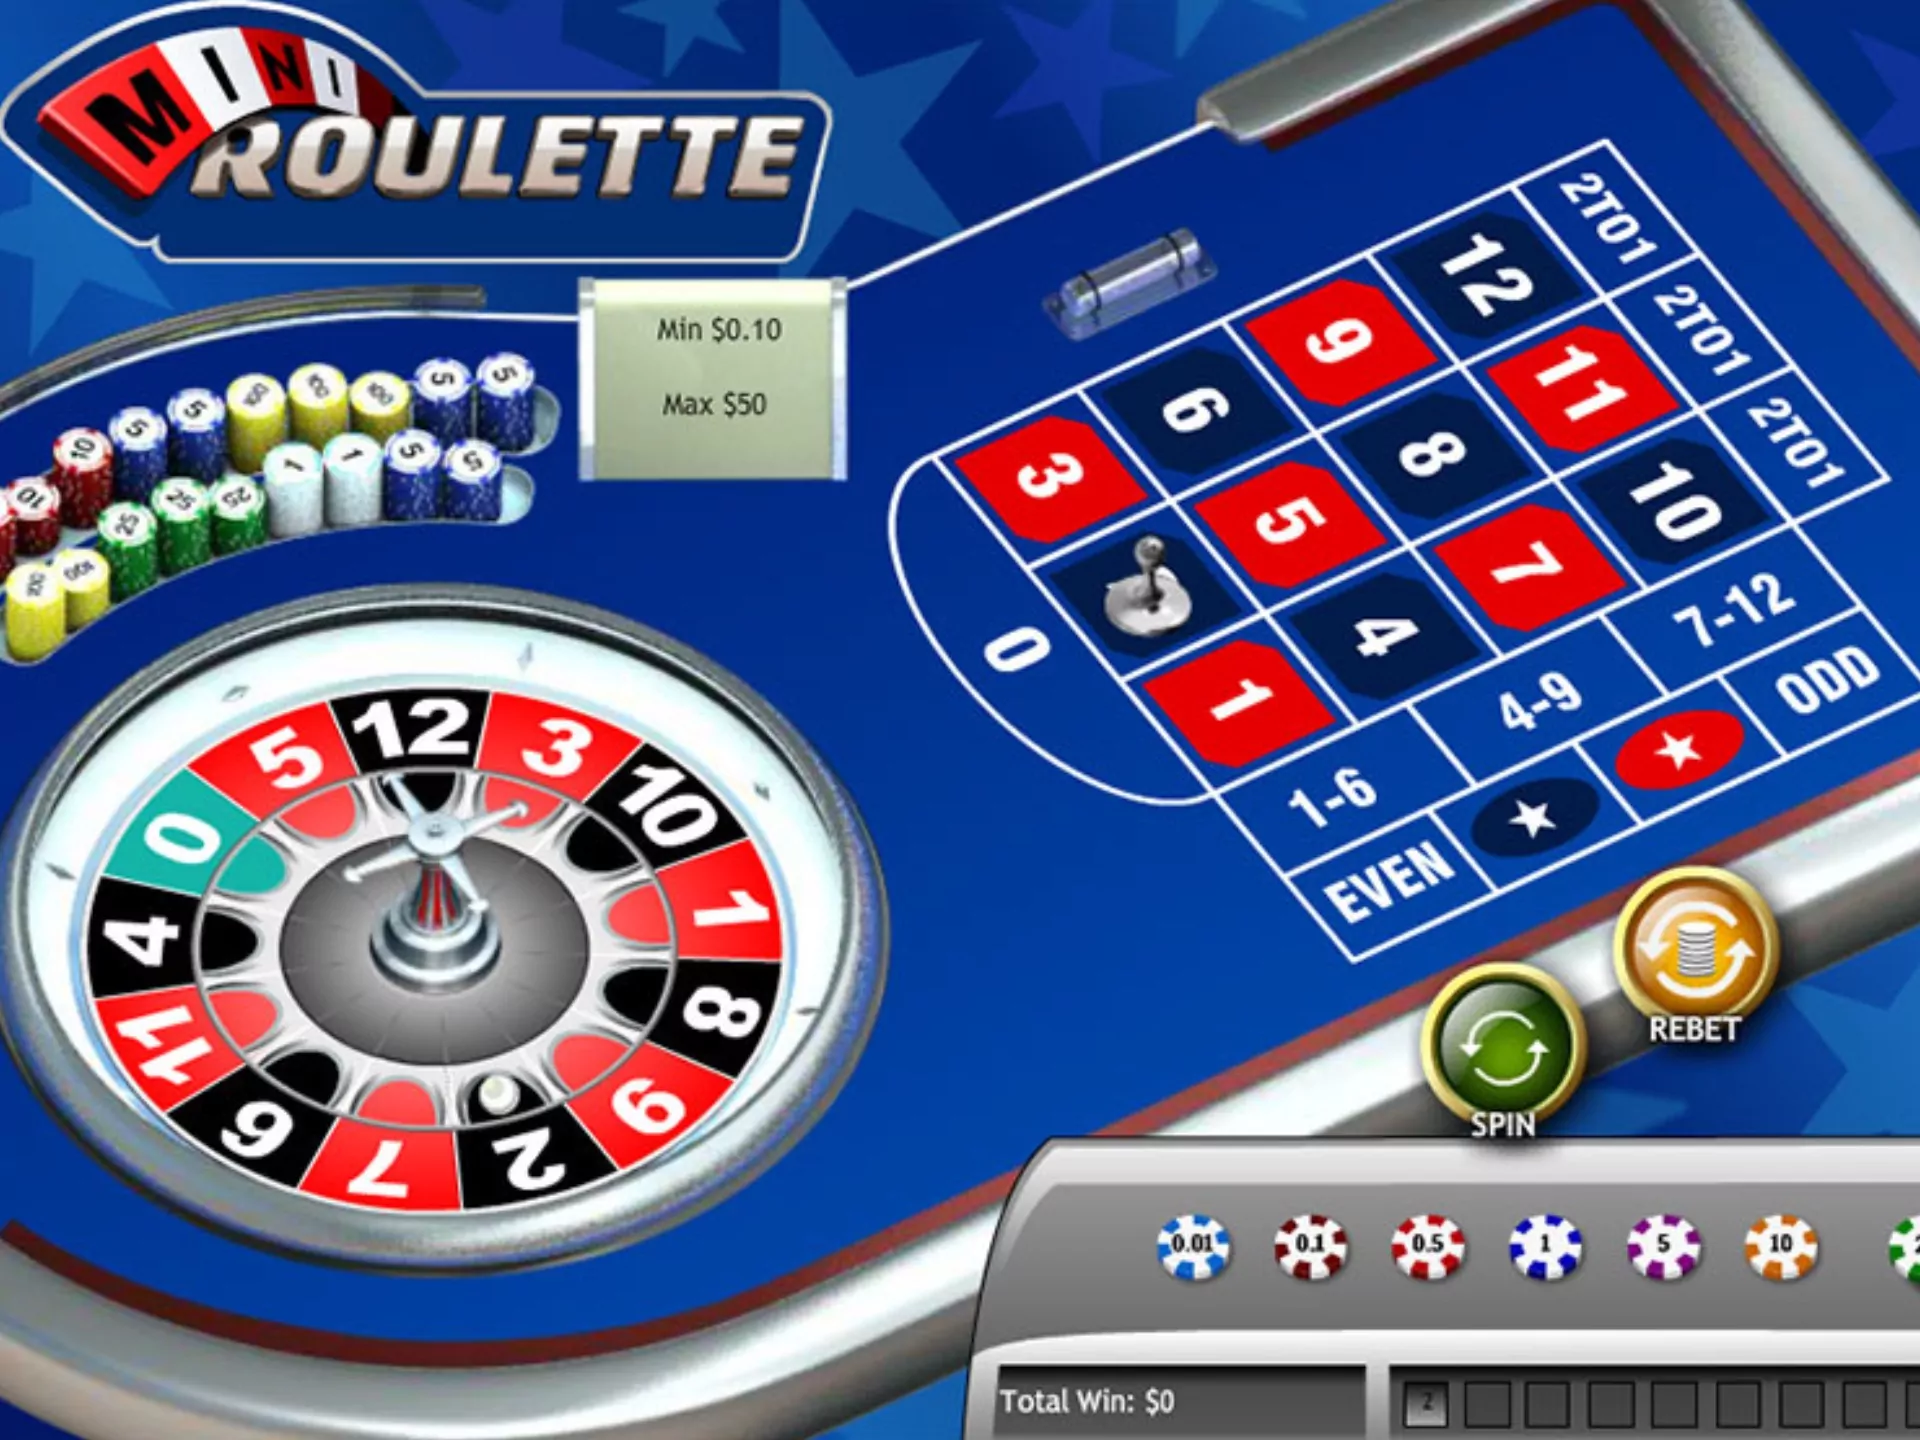 It's the same fun as the full version of online roulette.